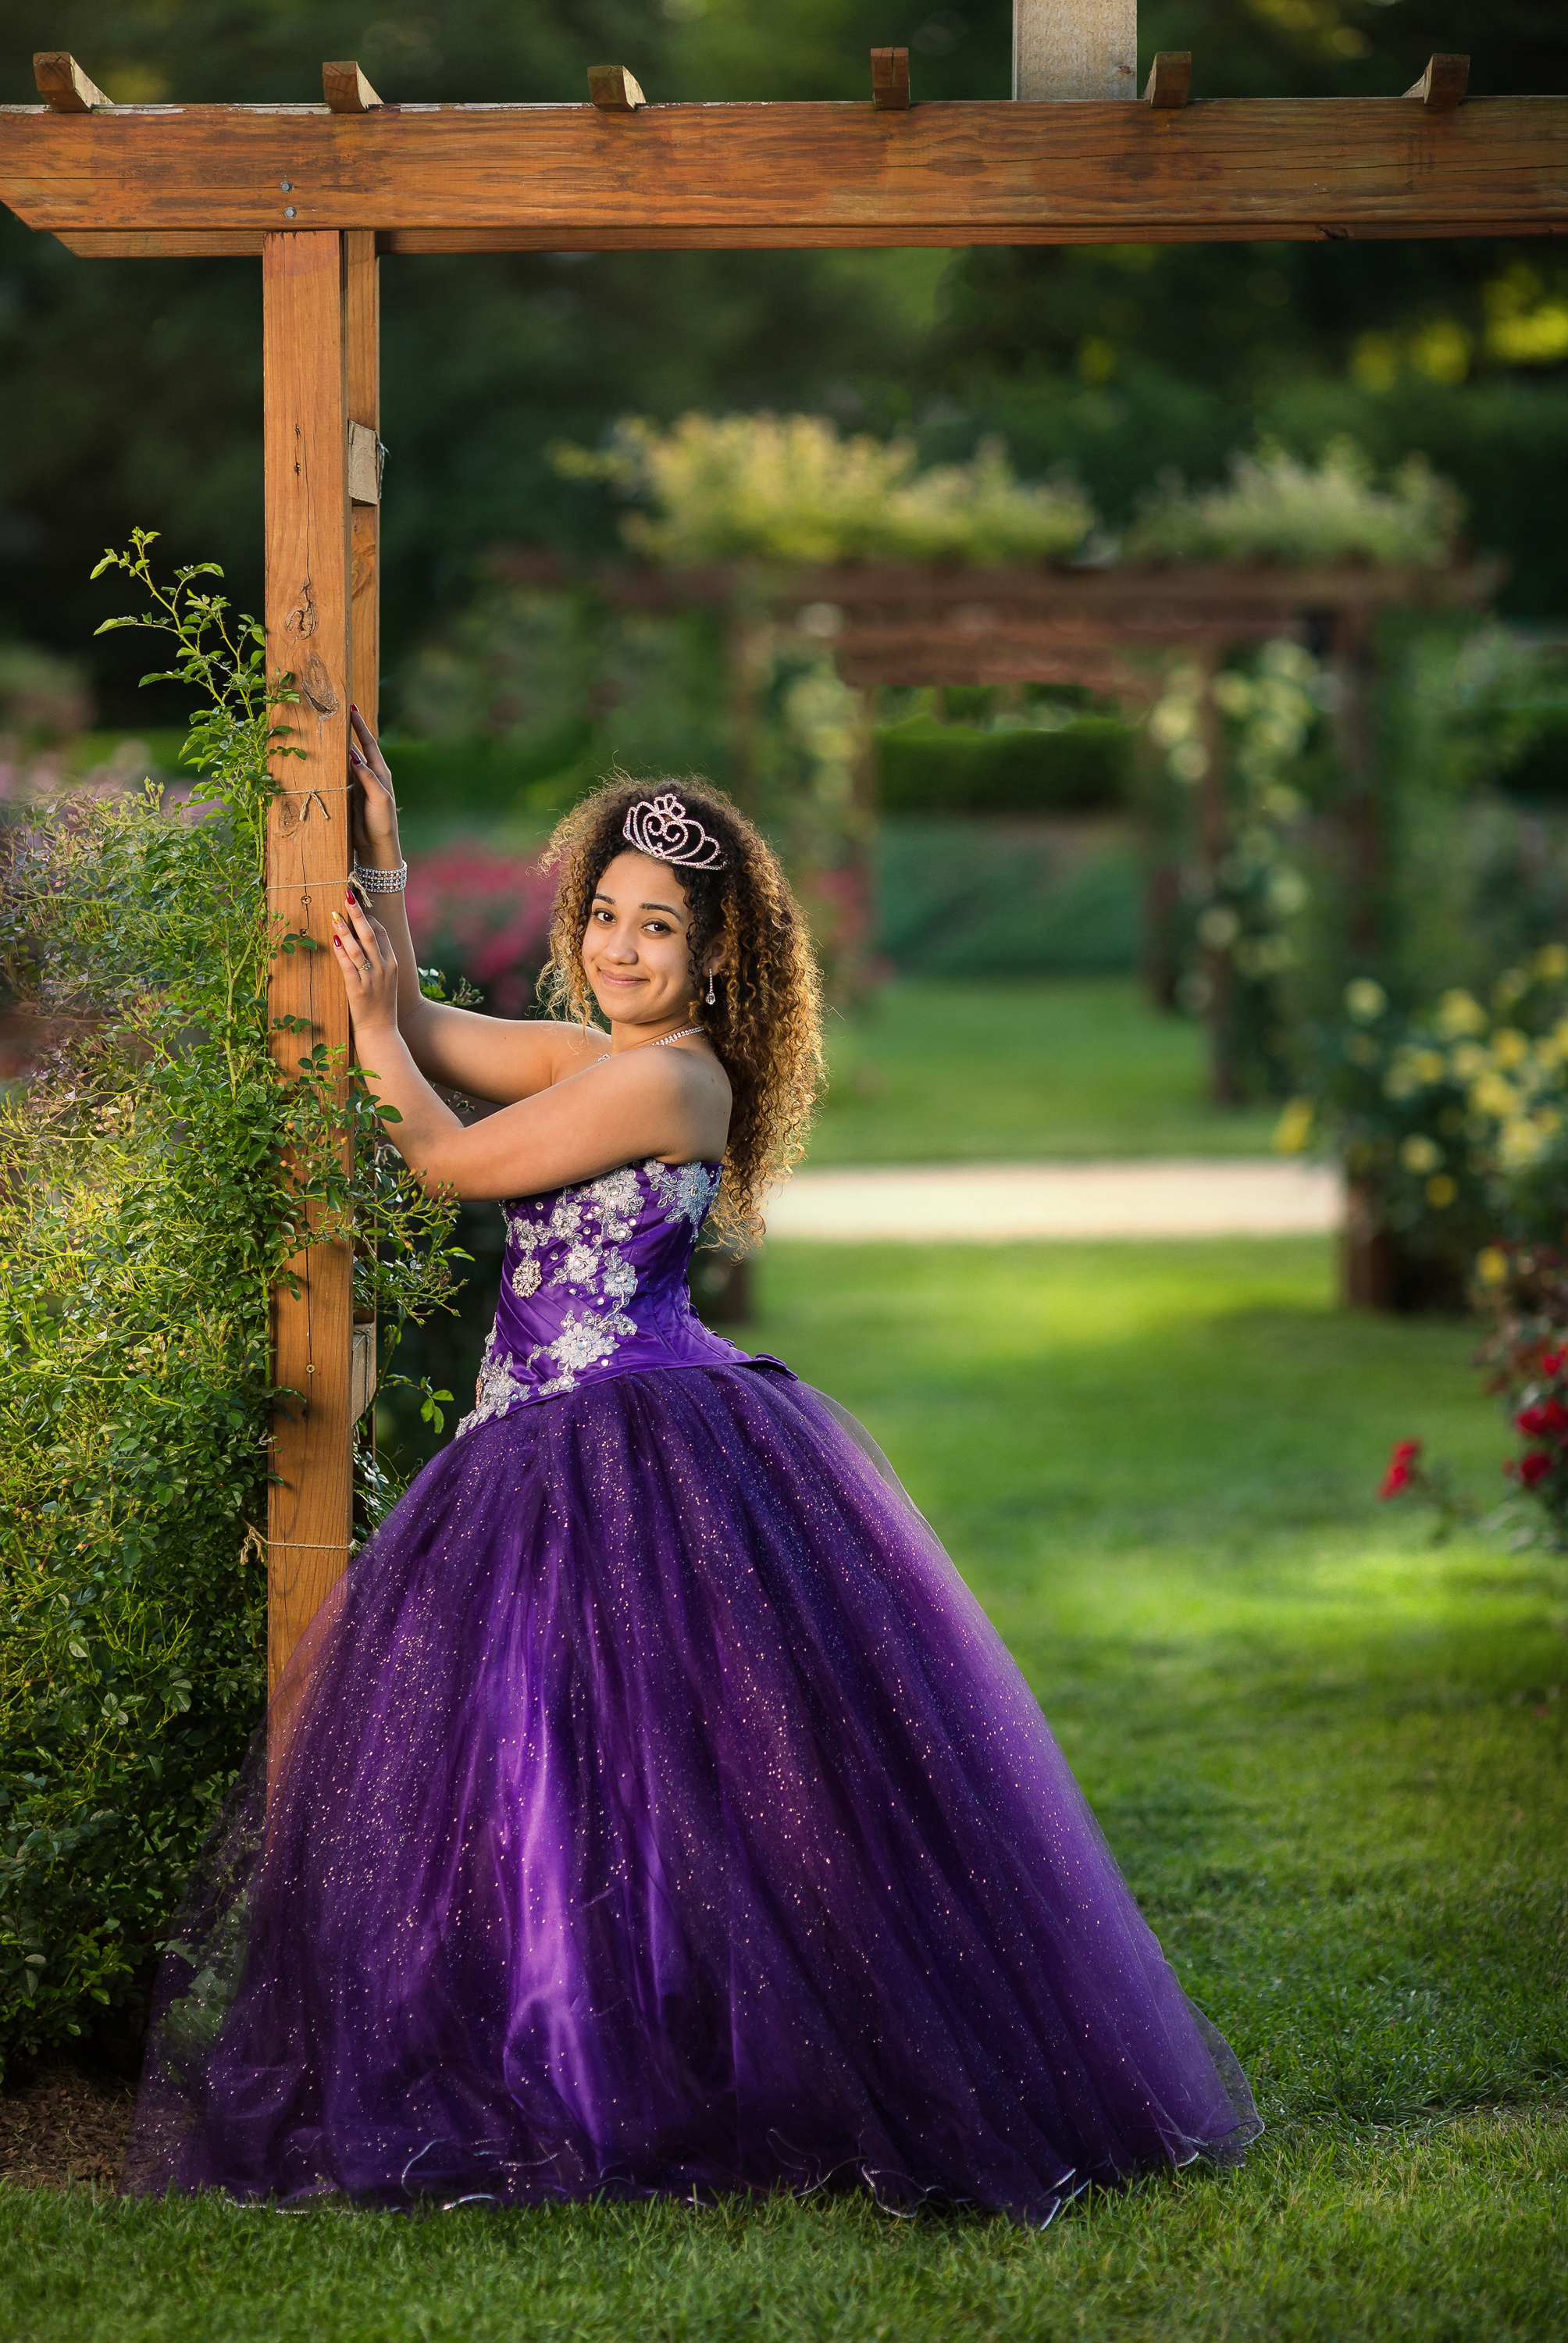 Natalias-Quince-Session-Garcia-Photography-2220-2.jpg